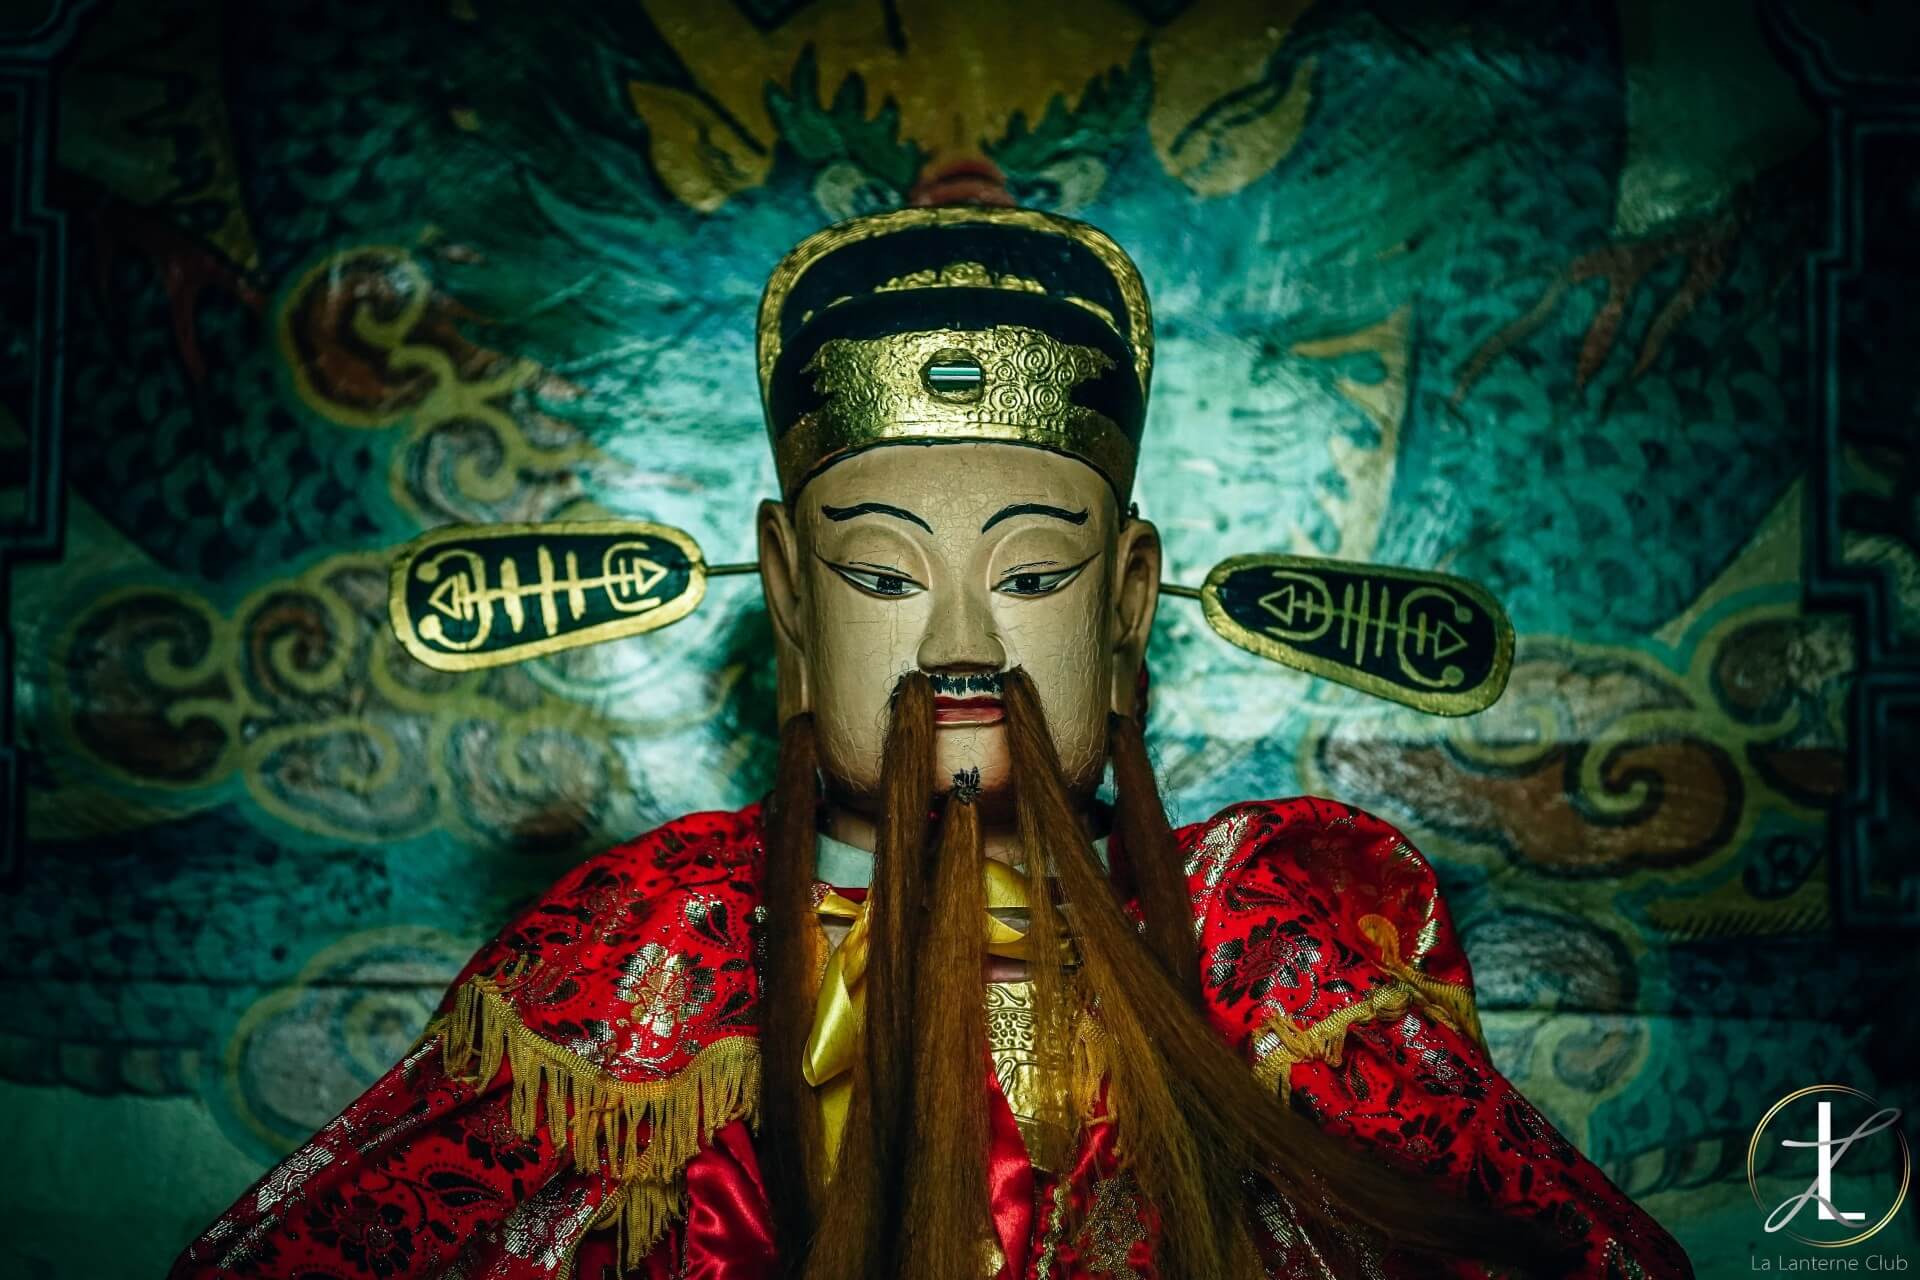 chinois avec barbe : styles et inspirations